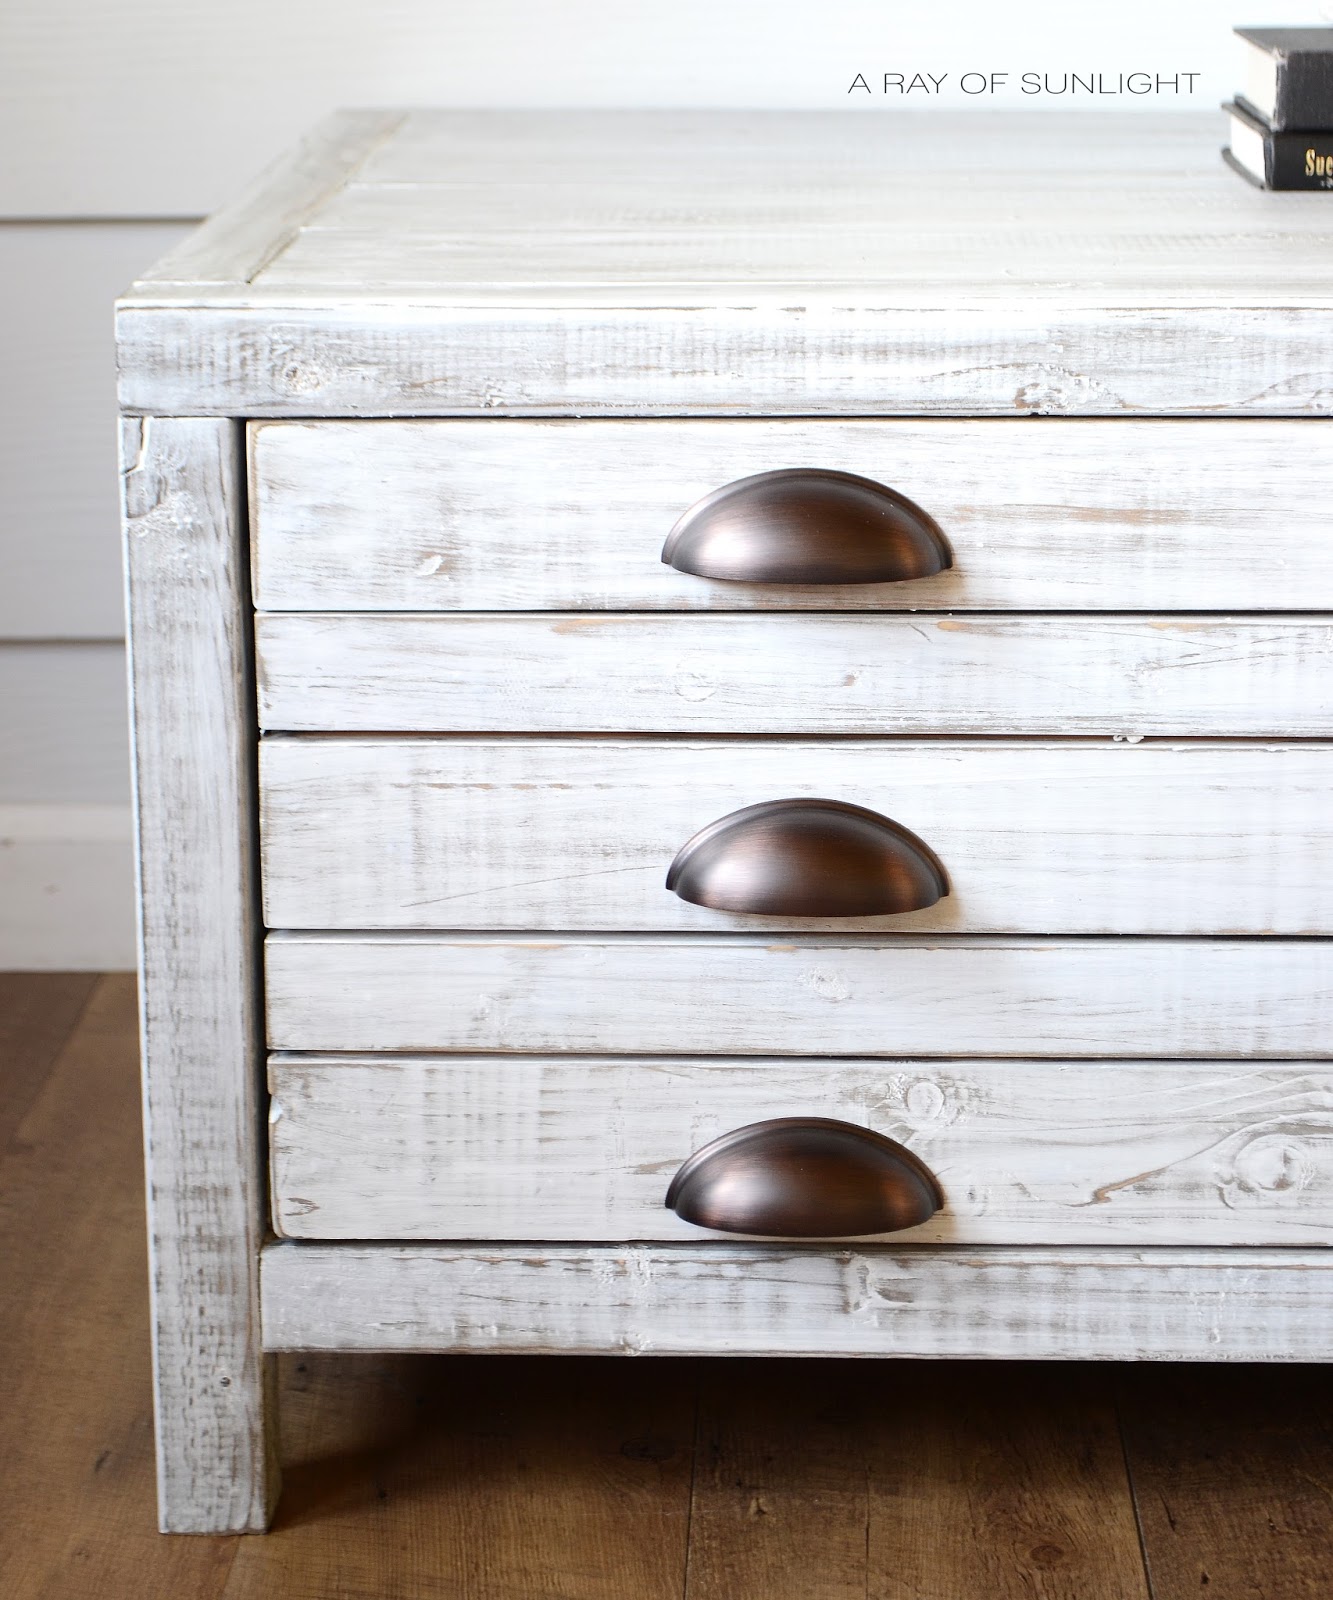 HOW TO build a DIY Coffee Table with a drawer, inspired by Restoration Hardware Printmaker's coffee table for $100! It's the perfect farmhouse table with loads of storage for your living room! A Ray of Sunlight